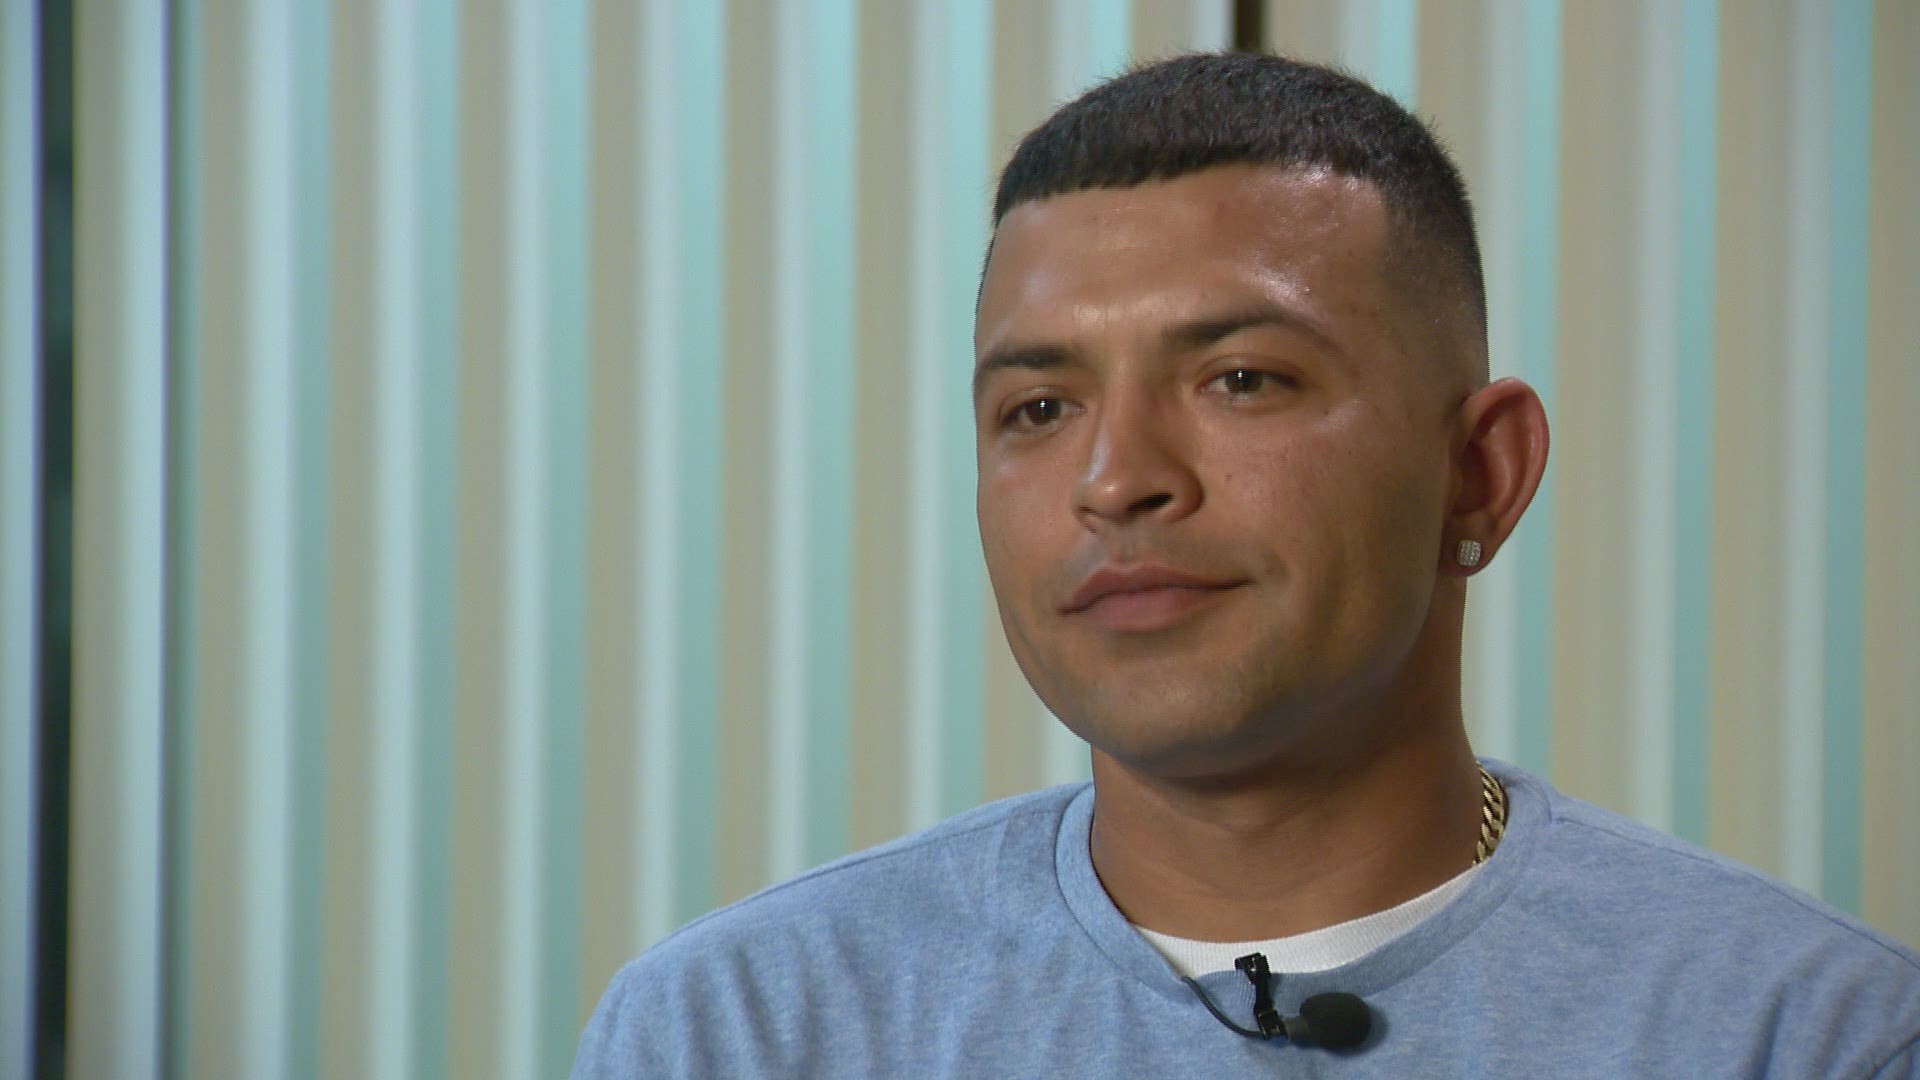 The umpire said he had warned parents about using foul language in front of 7-year-olds before the fight broke out. His dad, Josh Cordova Sr. said, "these young kids are looking up to you for advice. For you to do what you did, you should be embarrassed."